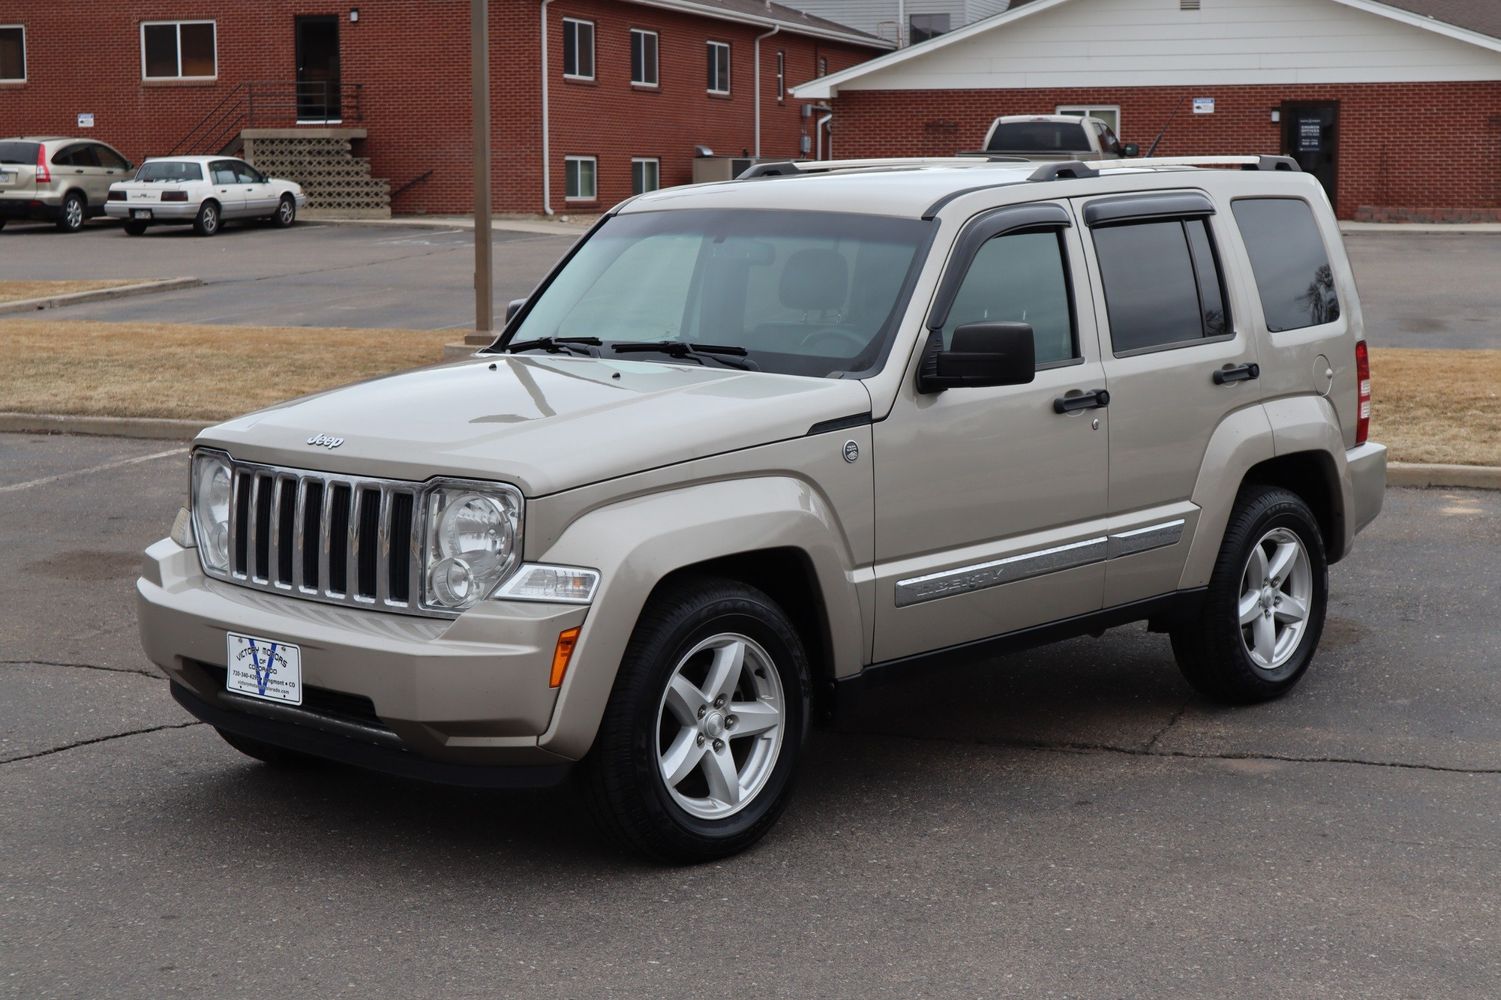 2011 Jeep Liberty Limited | Victory Motors of Colorado 2011 Jeep Liberty Gate Light Stays On